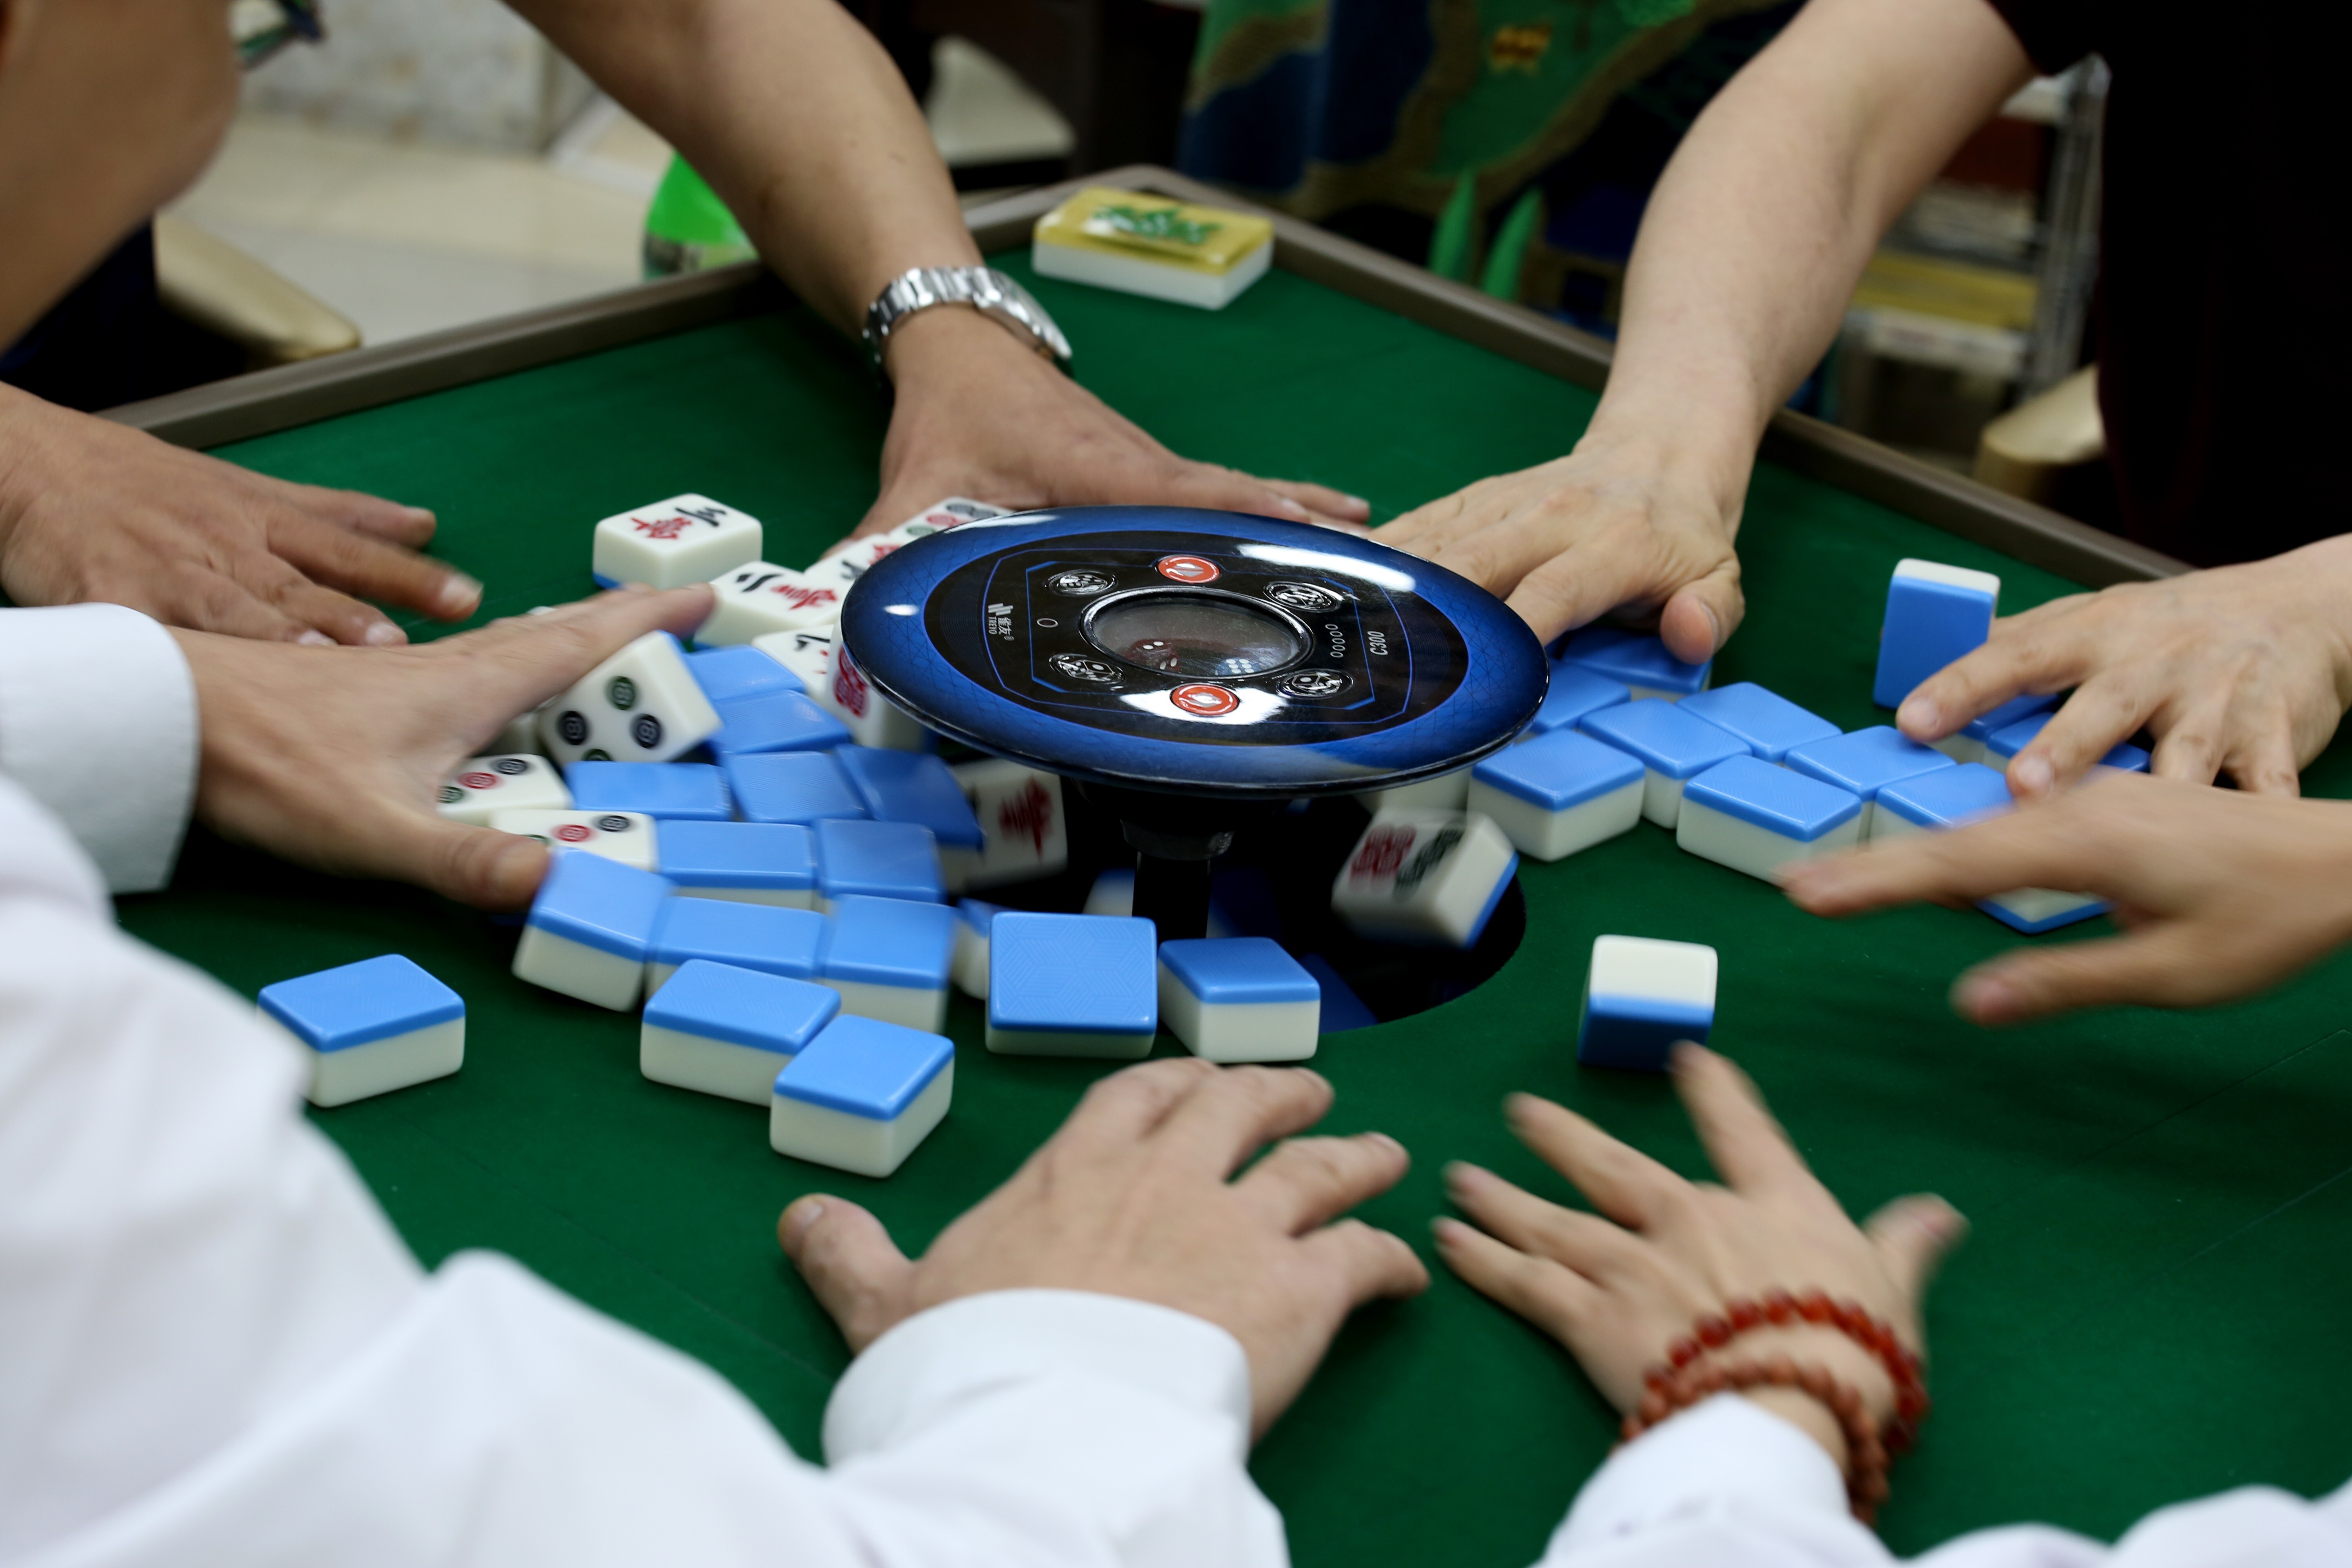 Hong Kong’s mahjong parlours are among the latest venues ordered shut by the government amid the Covid-19 pandemic. Photo: Nora Tam